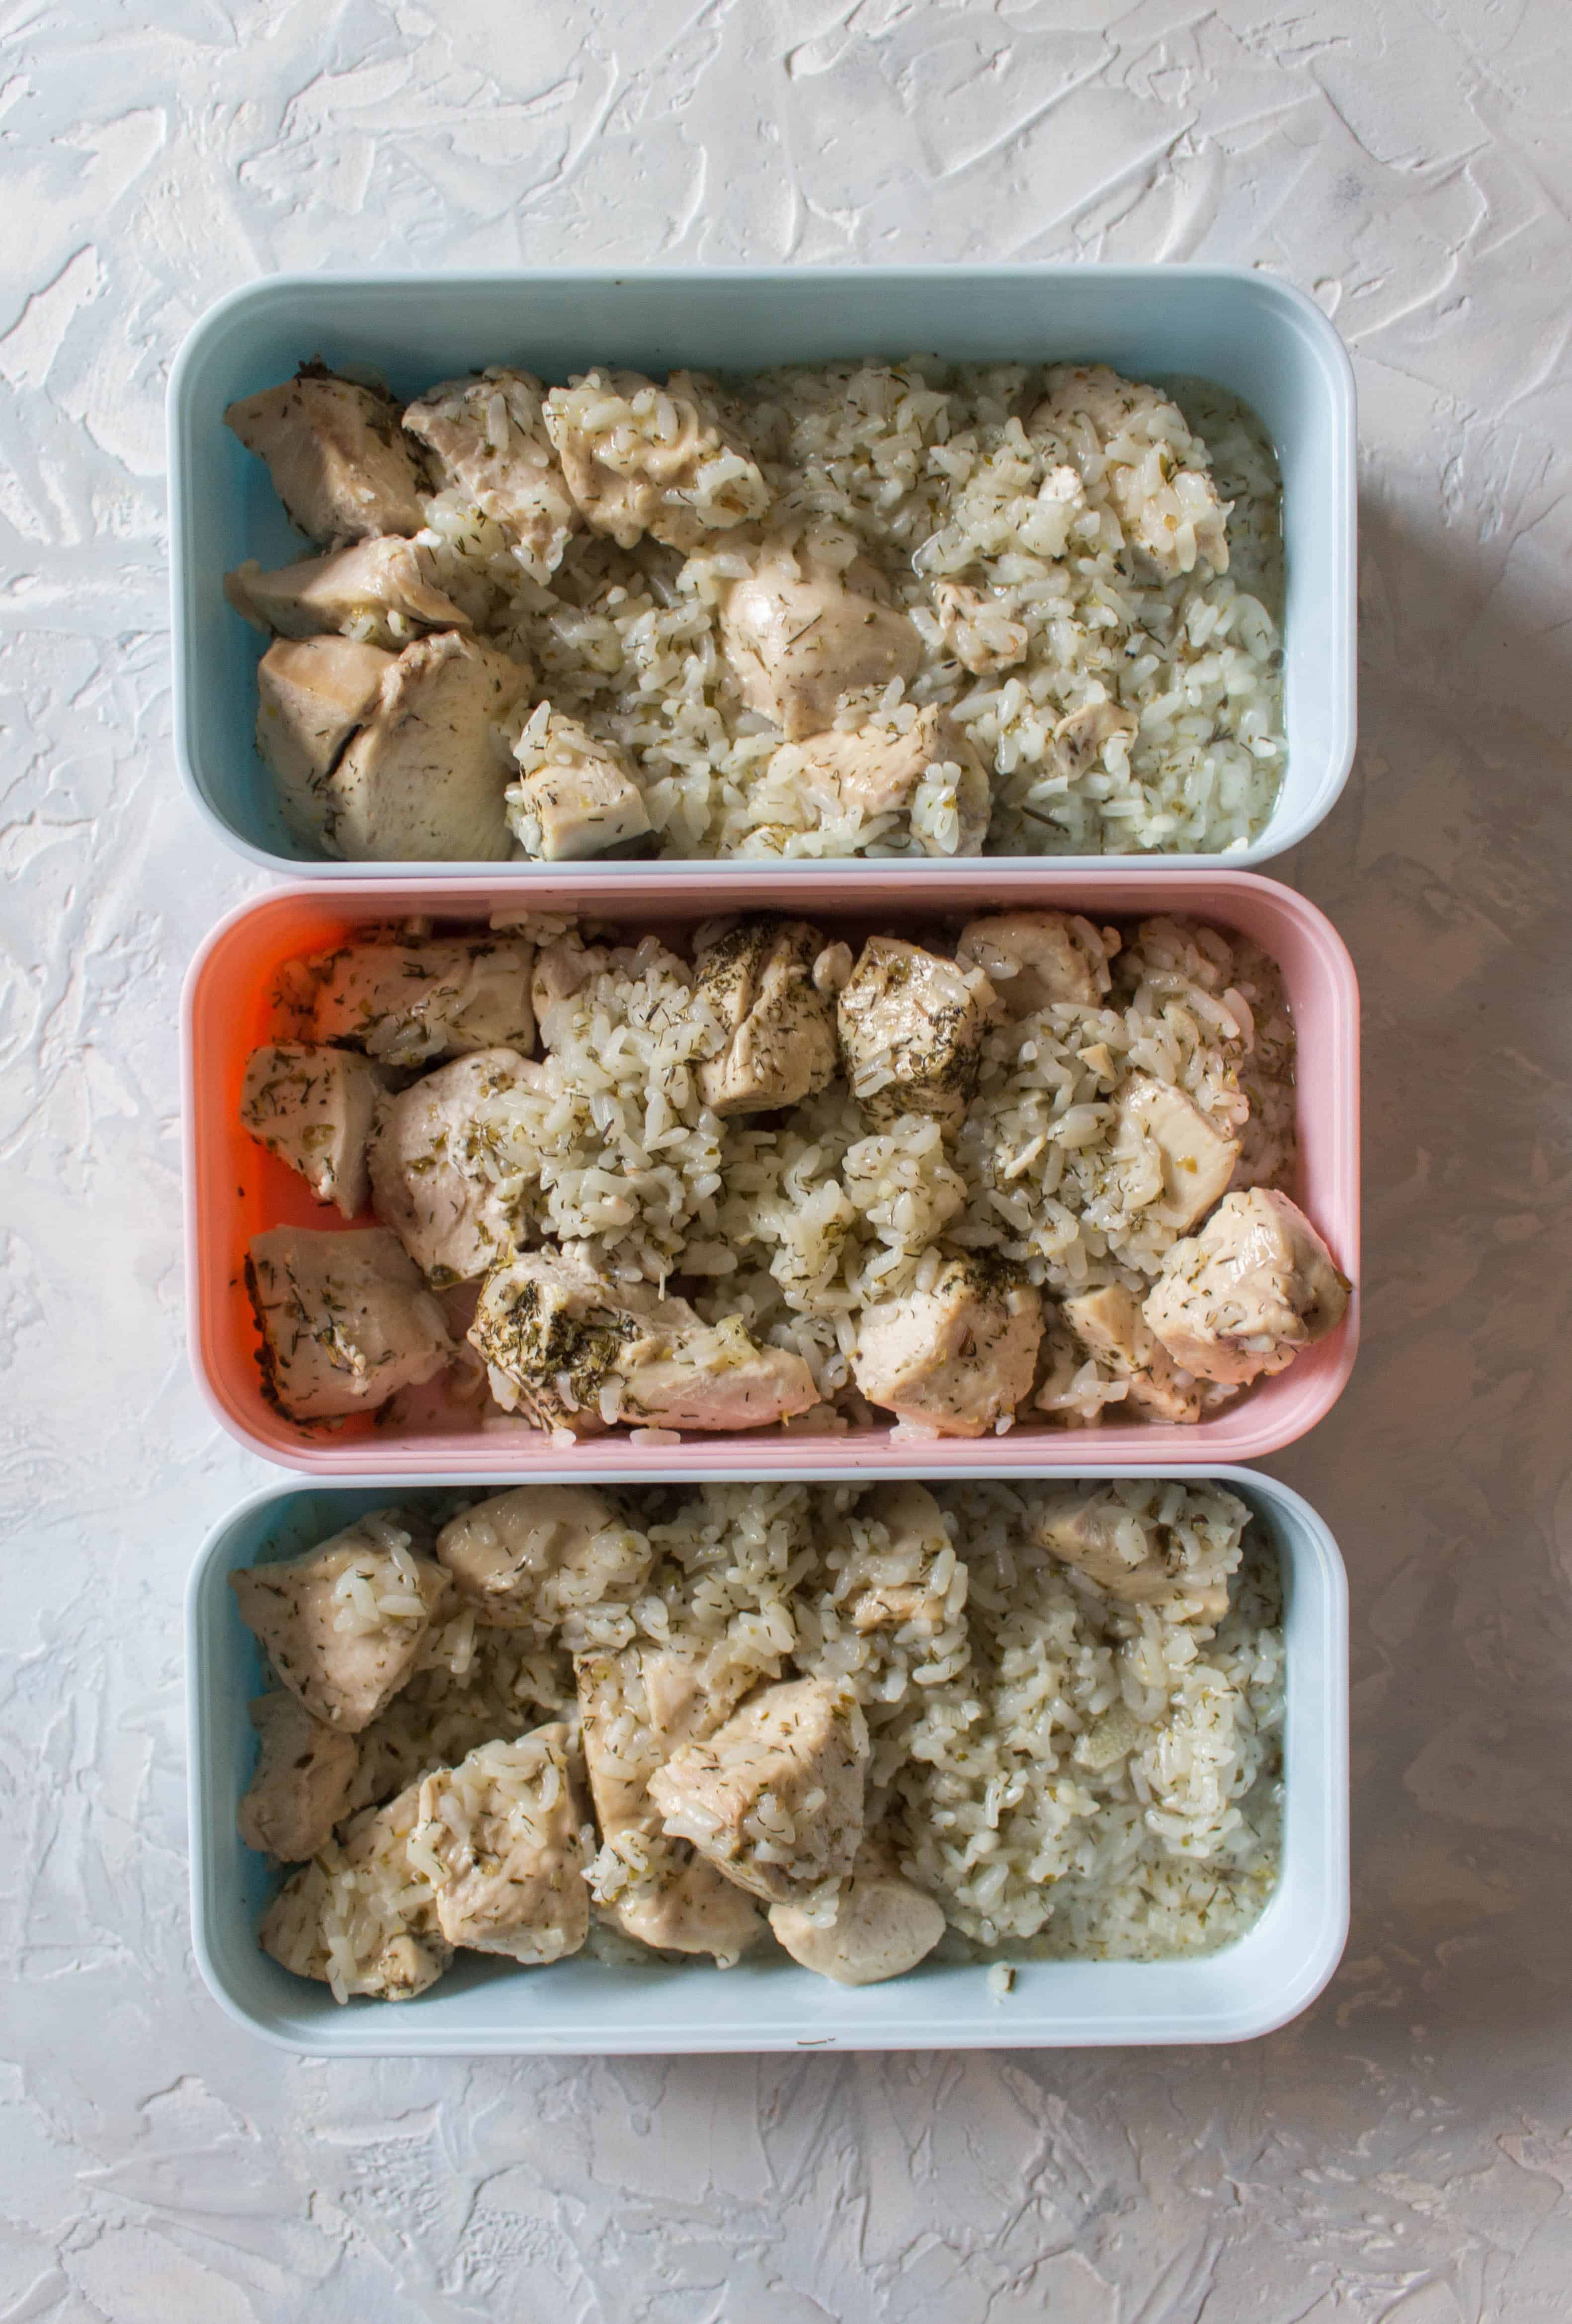 This Healthy Greek Chicken Instant Pot Meal Prep Recipe is the perfect meal prep for the week! This Greek Chicken recipe is so quick and easy, you’re going to want to make all the time because it takes just a few spices and a couple of minutes to make! Non-Instant Pot instructions are down below if you don't have an Instant Pot! #Instantpot #easyrecipe #greekchicken #chickenrecipe